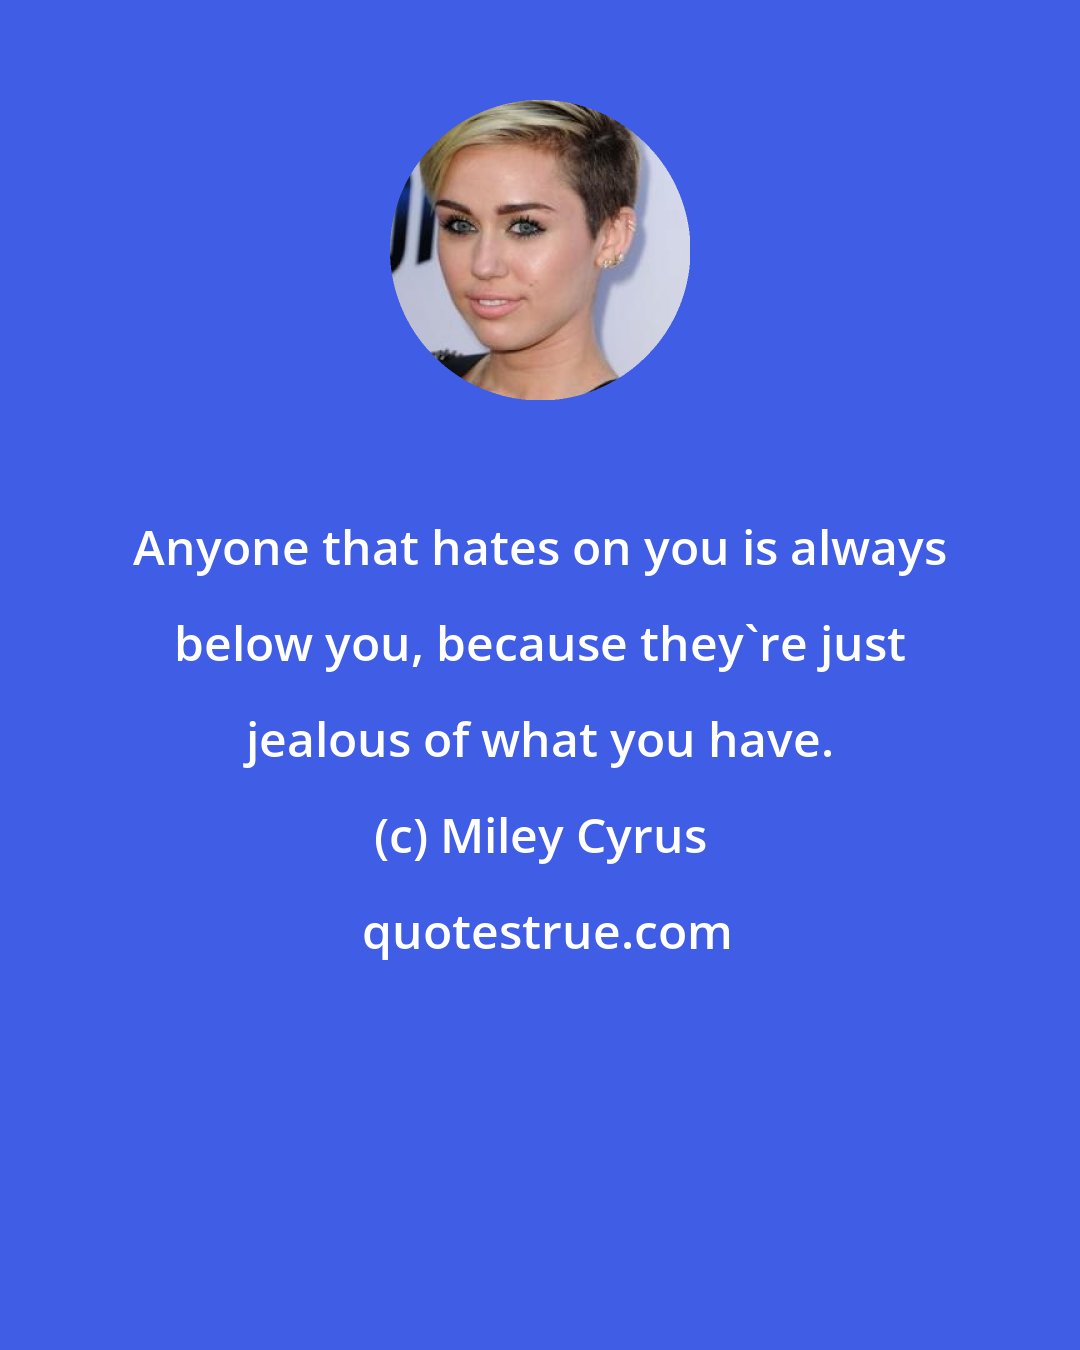 Miley Cyrus: Anyone that hates on you is always below you, because they're just jealous of what you have.